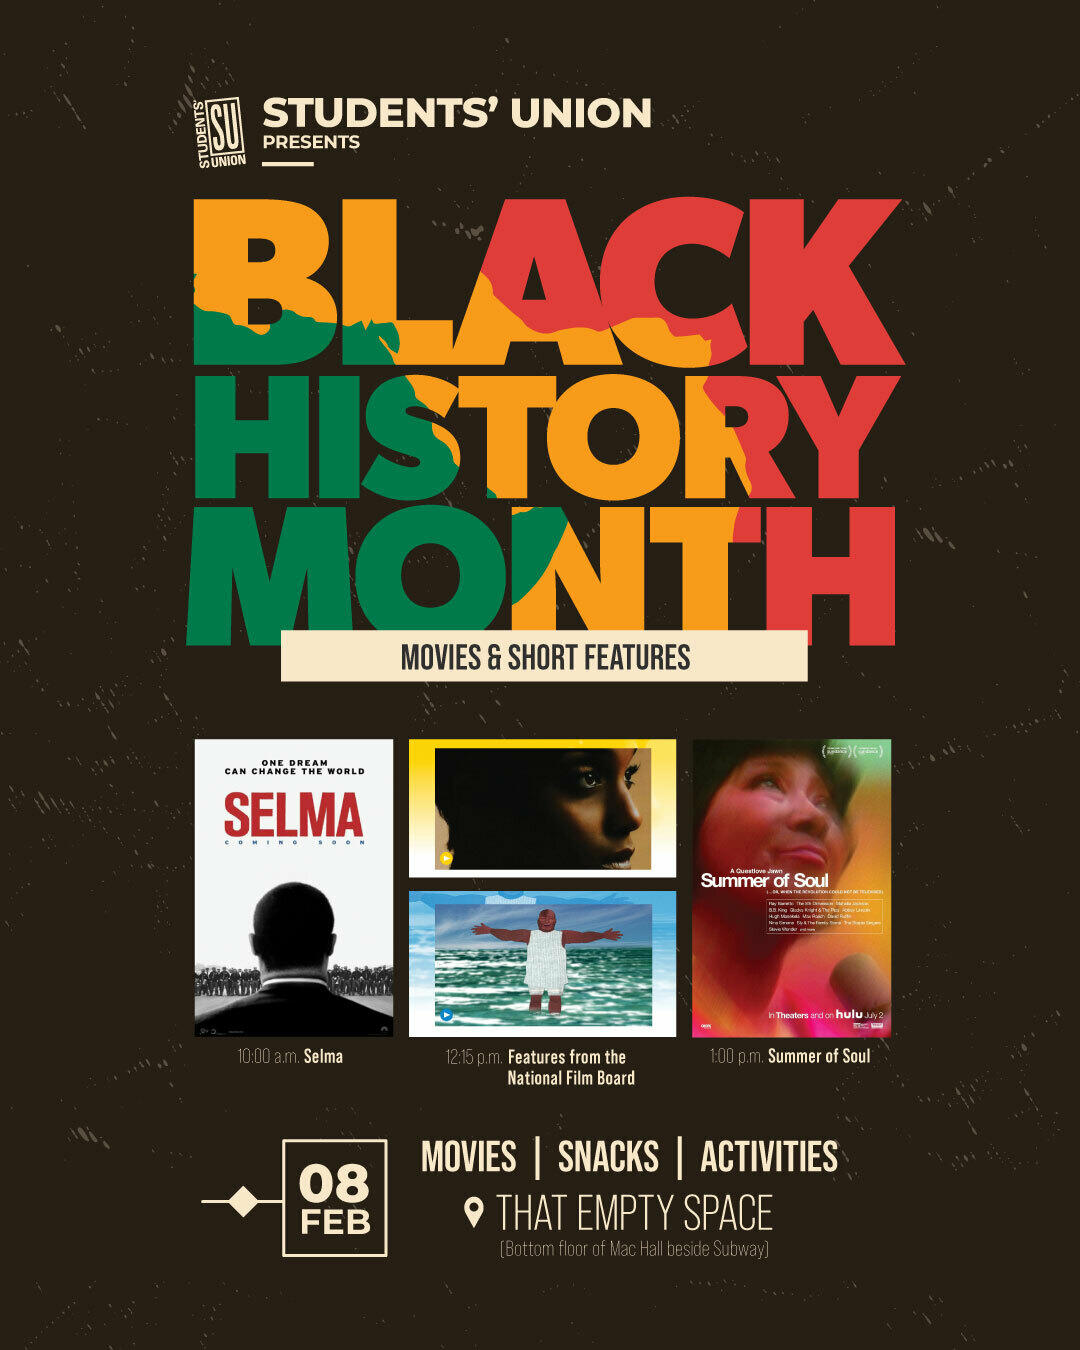 Black History Month Movies and Short Films